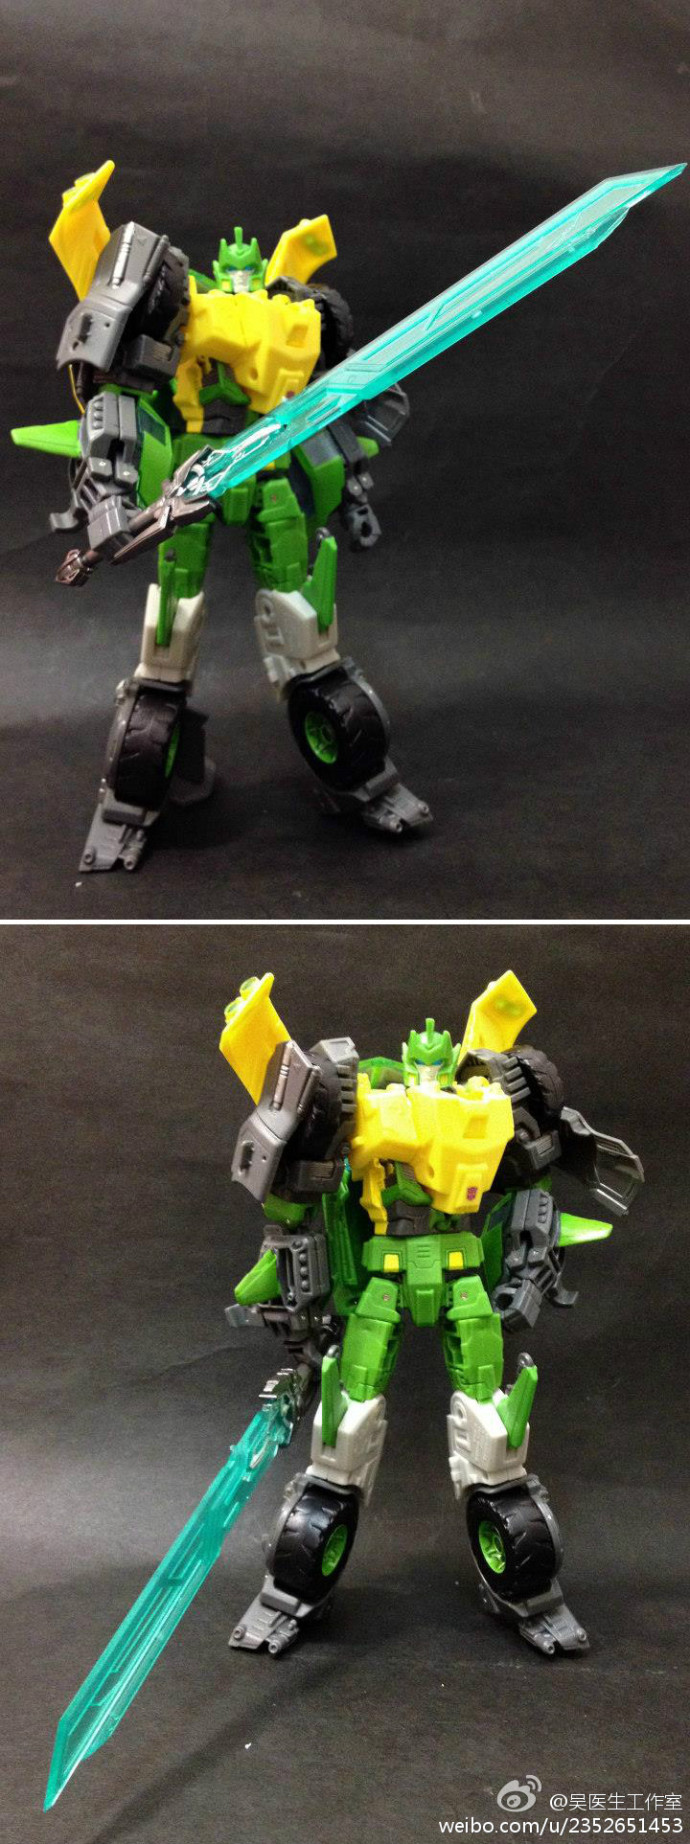 Generations Springer with the Skybreaker Green